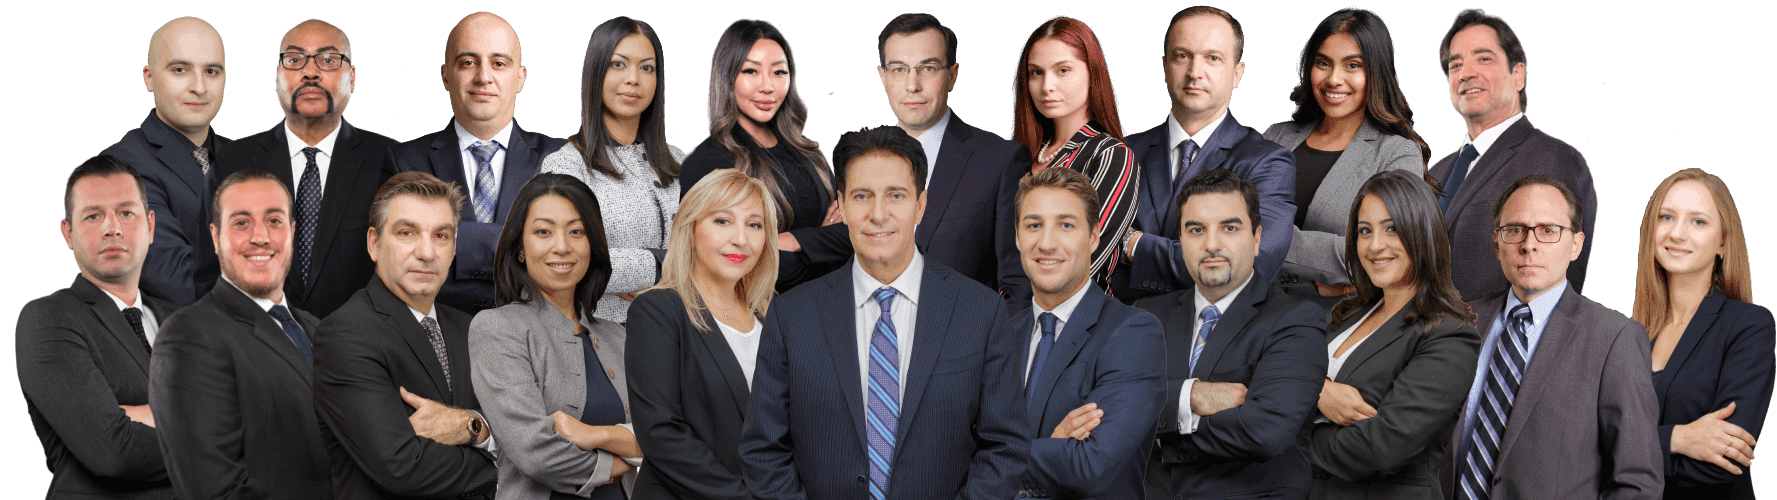 Our Team - Grillo Law Personal Injury Lawyers